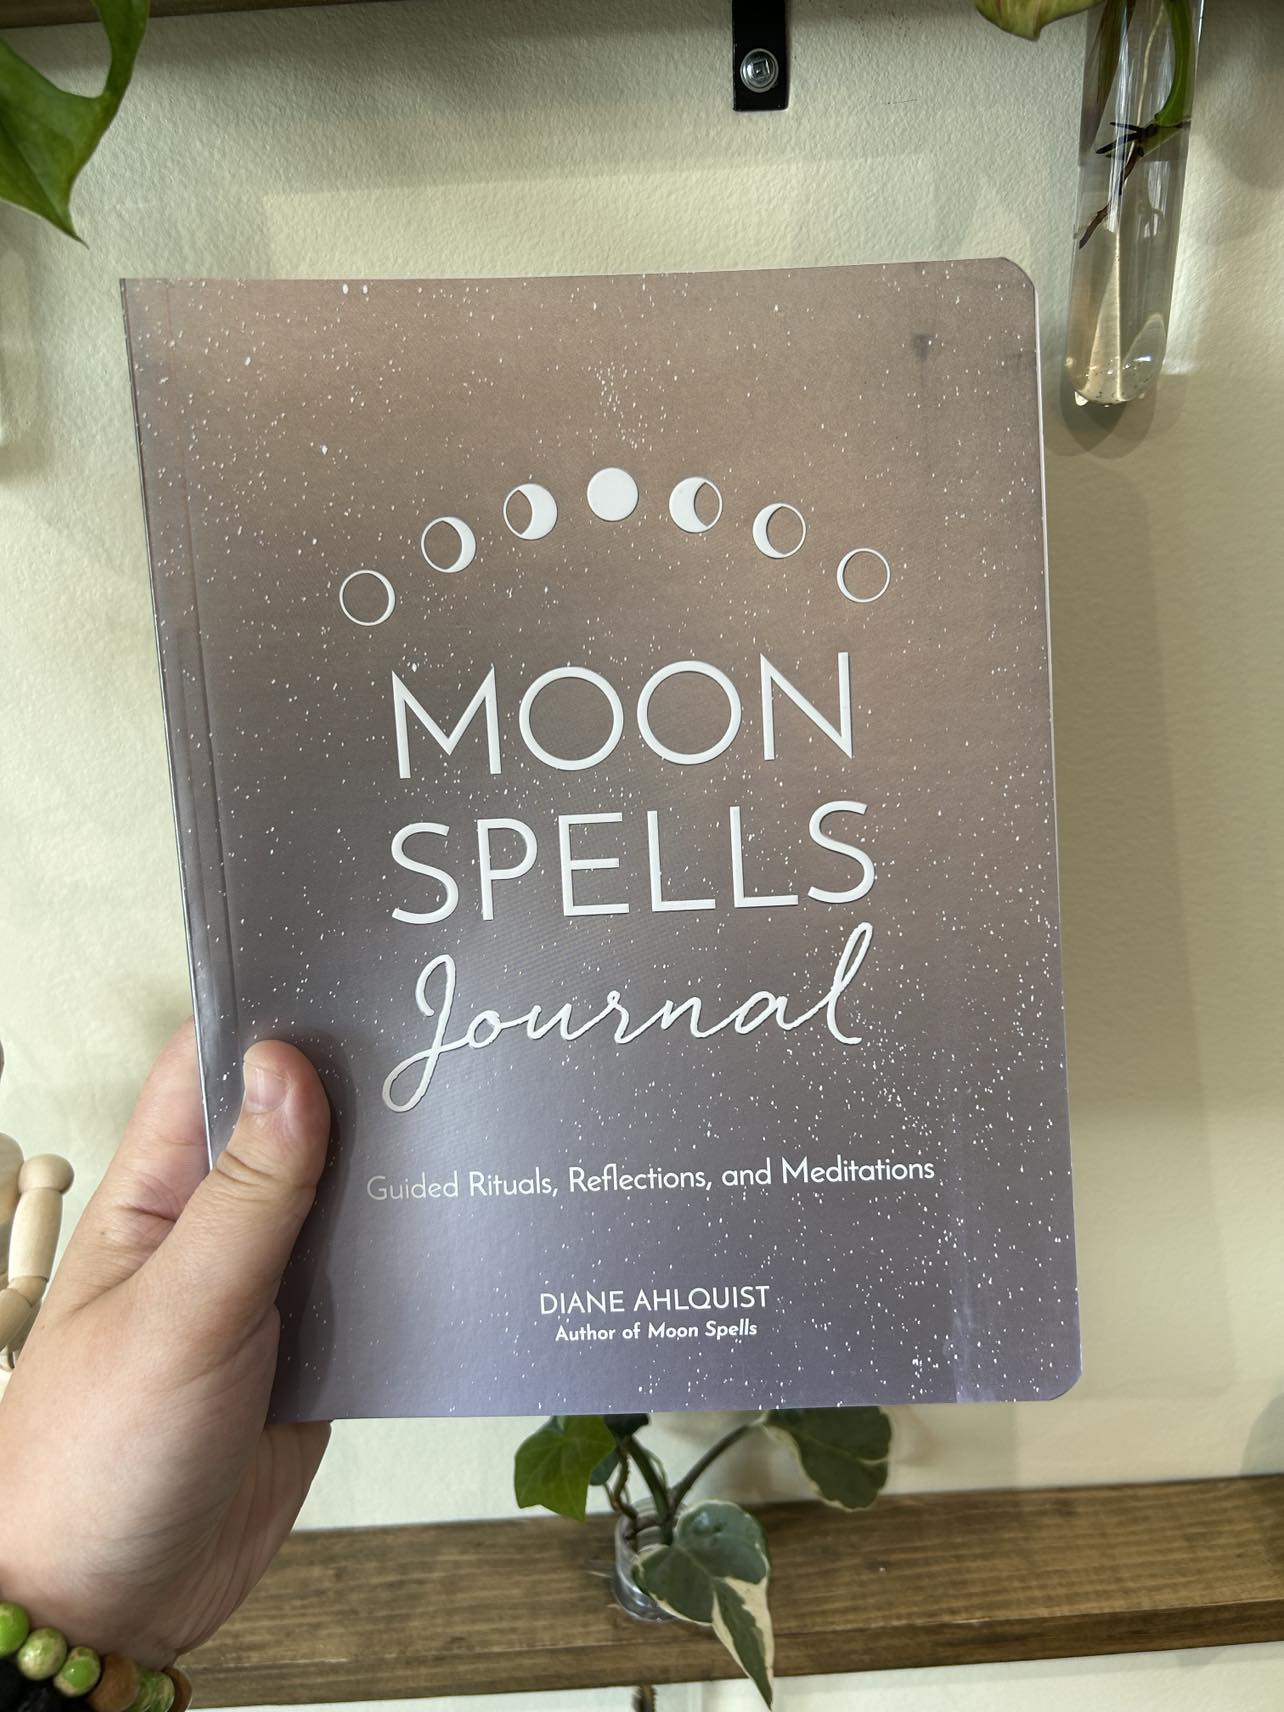 Moon spells Journal by Diane Ahlquist